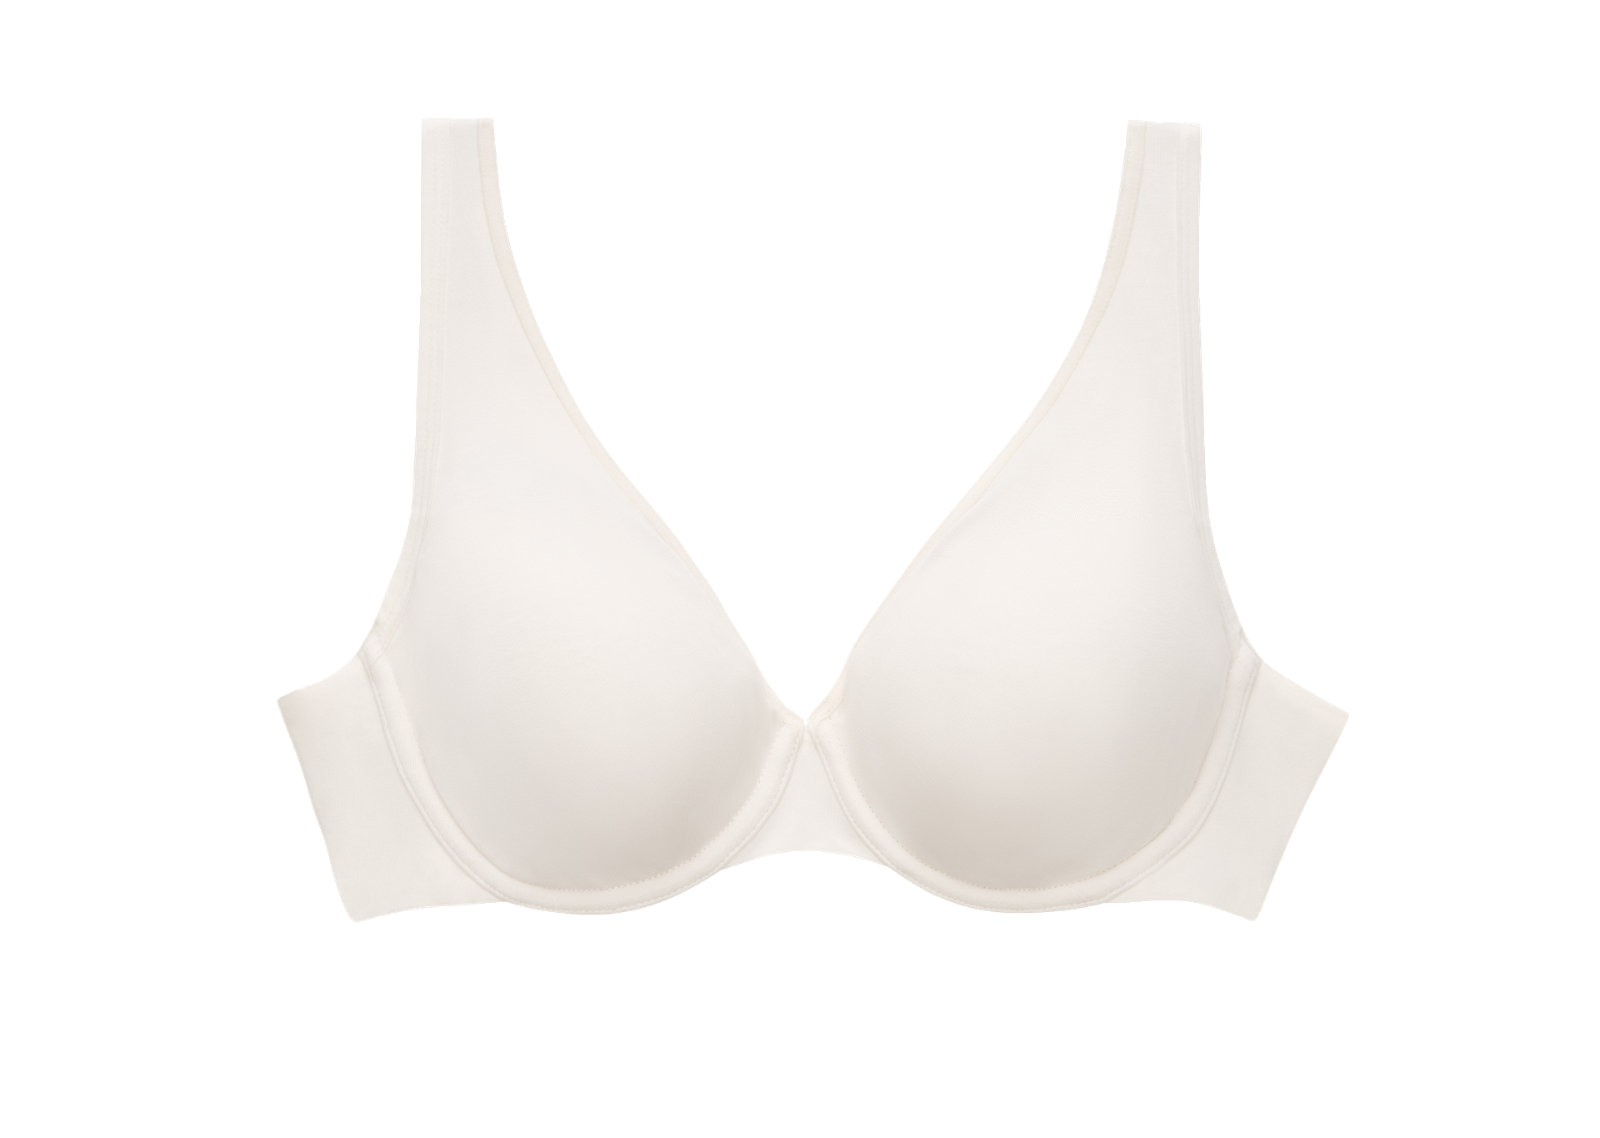 ThirdLove - Our Unlined Minimizer Bra has got all of your